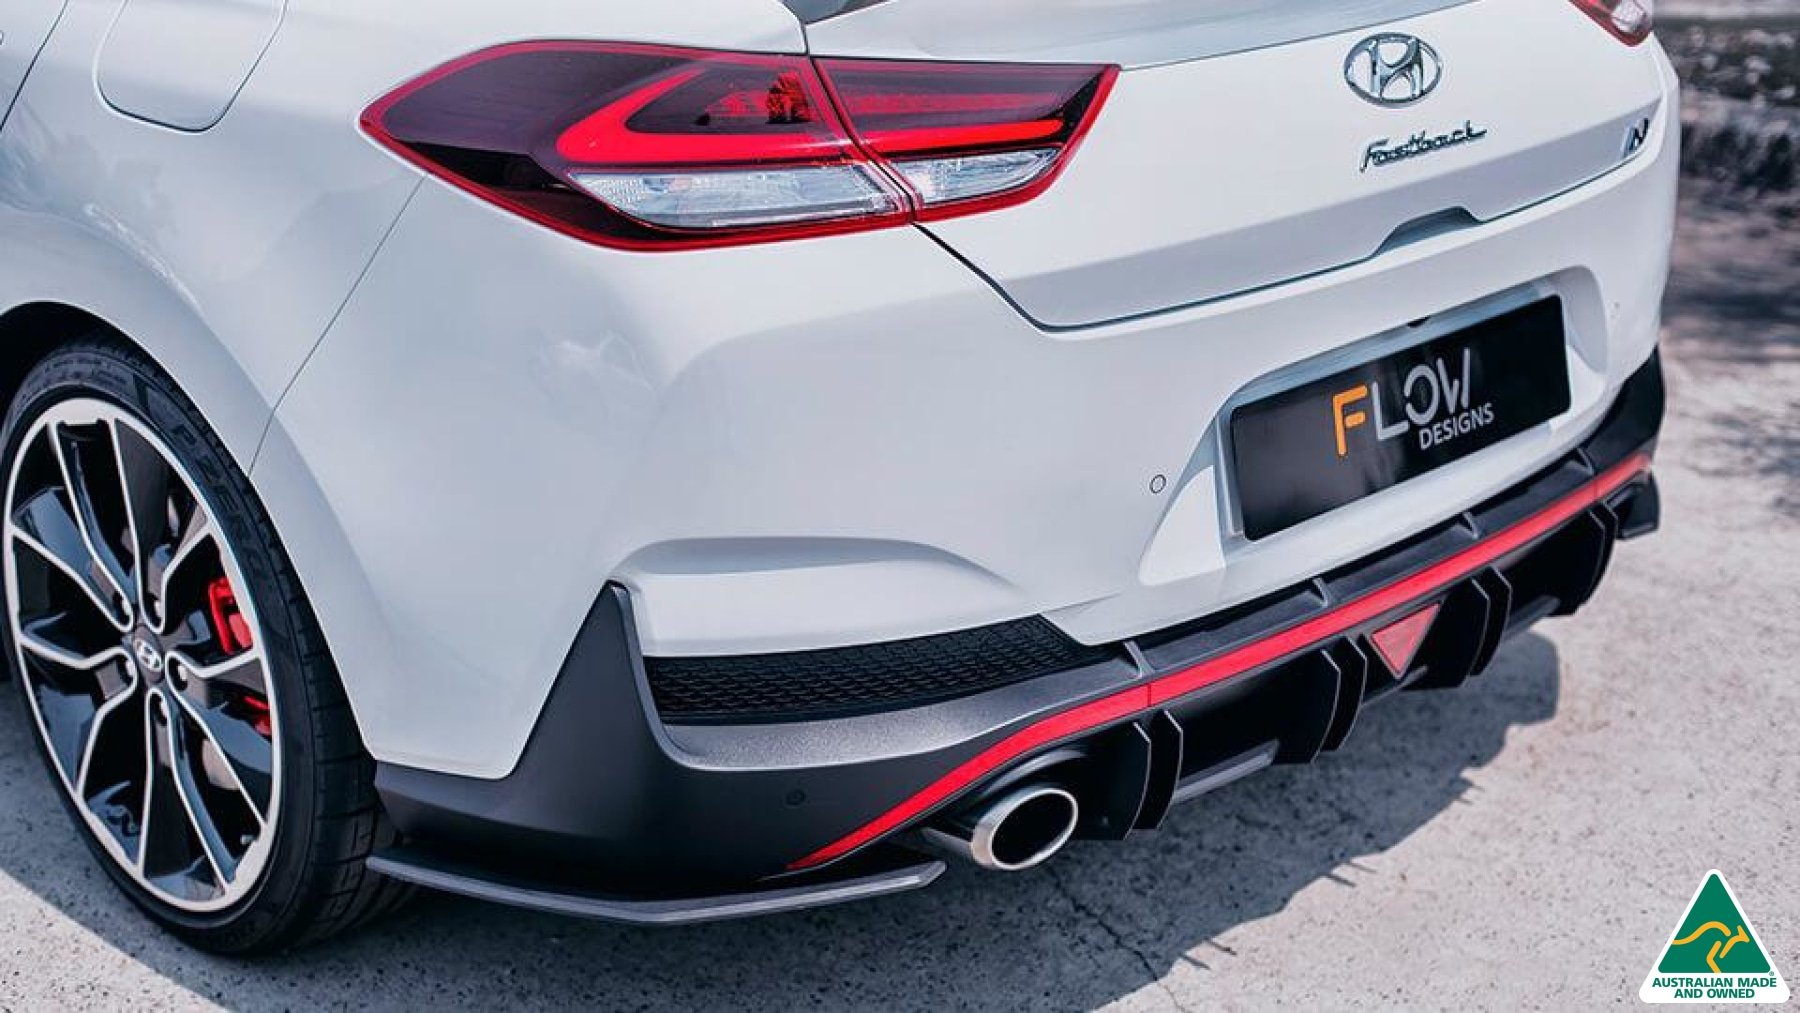 i30N Fastback PD Rear Pods/Spats (Pair) - MODE Auto Concepts